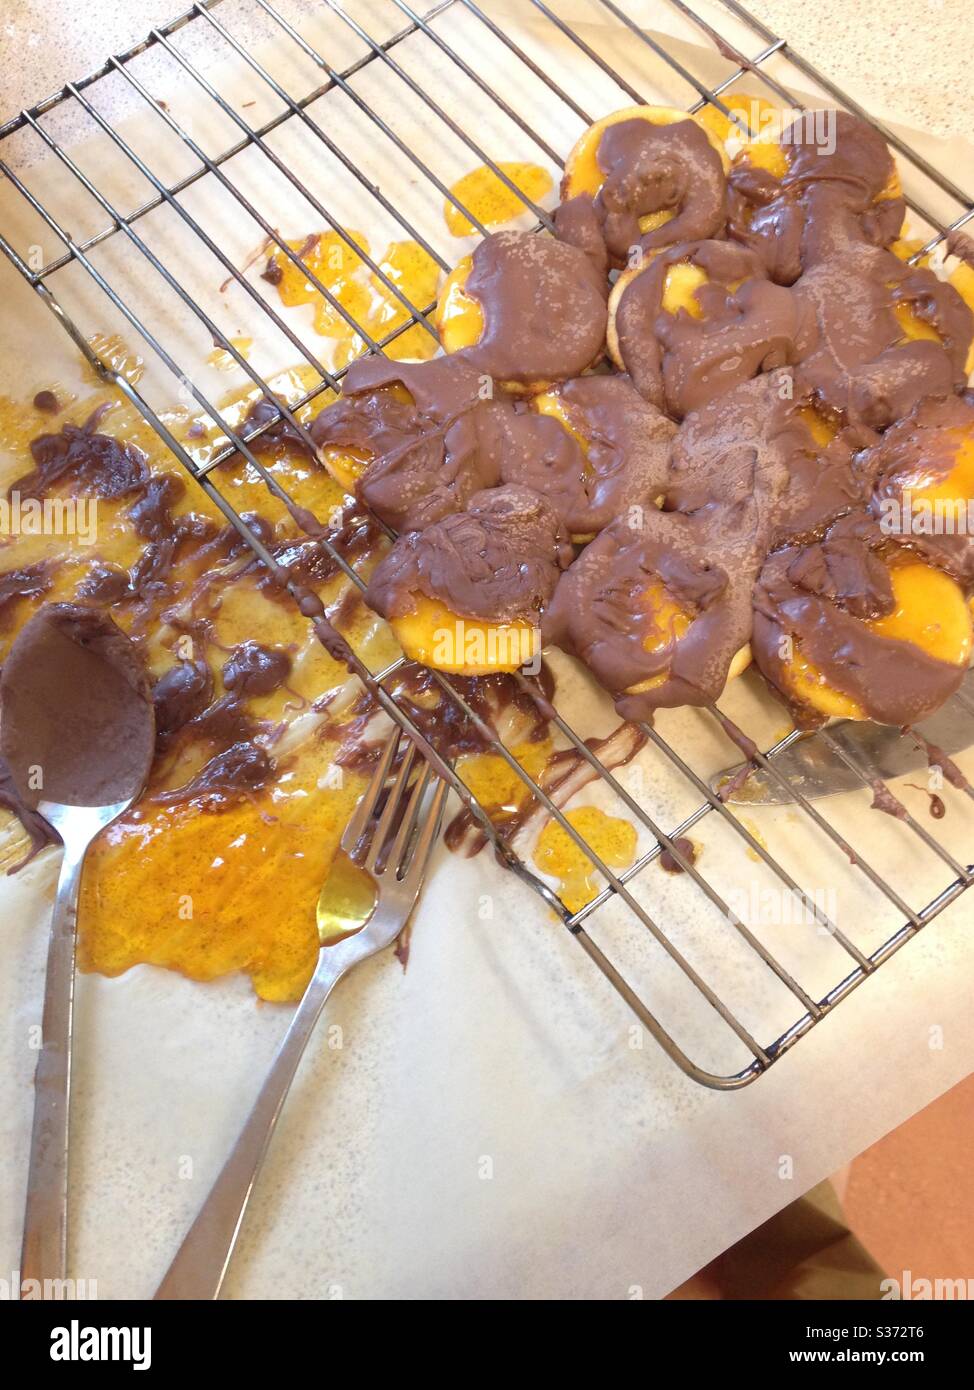 https://c8.alamy.com/comp/S372T6/baking-fail-attempting-to-make-jaffa-cakes-S372T6.jpg